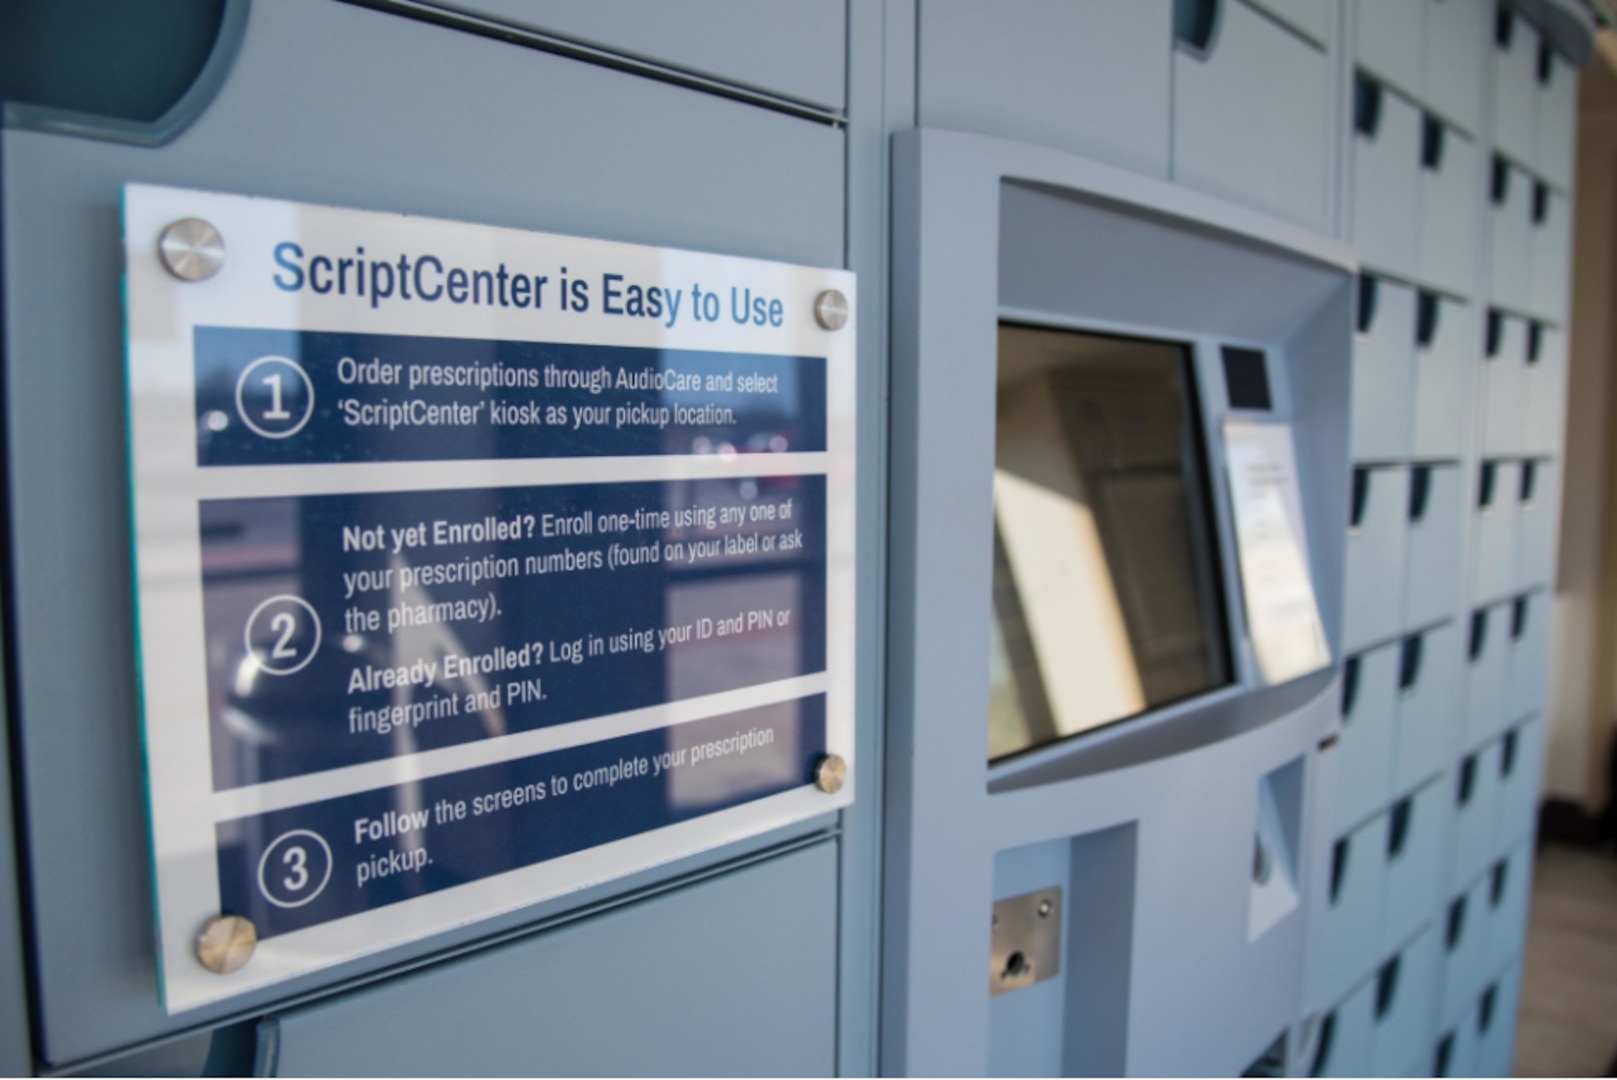 McConnell Air Force Base, Kansas, is the first base to install the newest version of ScriptCenter as of December 2020. The machine allows all active duty, retirees and dependents to pick up prescription refills 24/7. (U.S. Air Force photo by Senior Airman Alexi Bosarge)